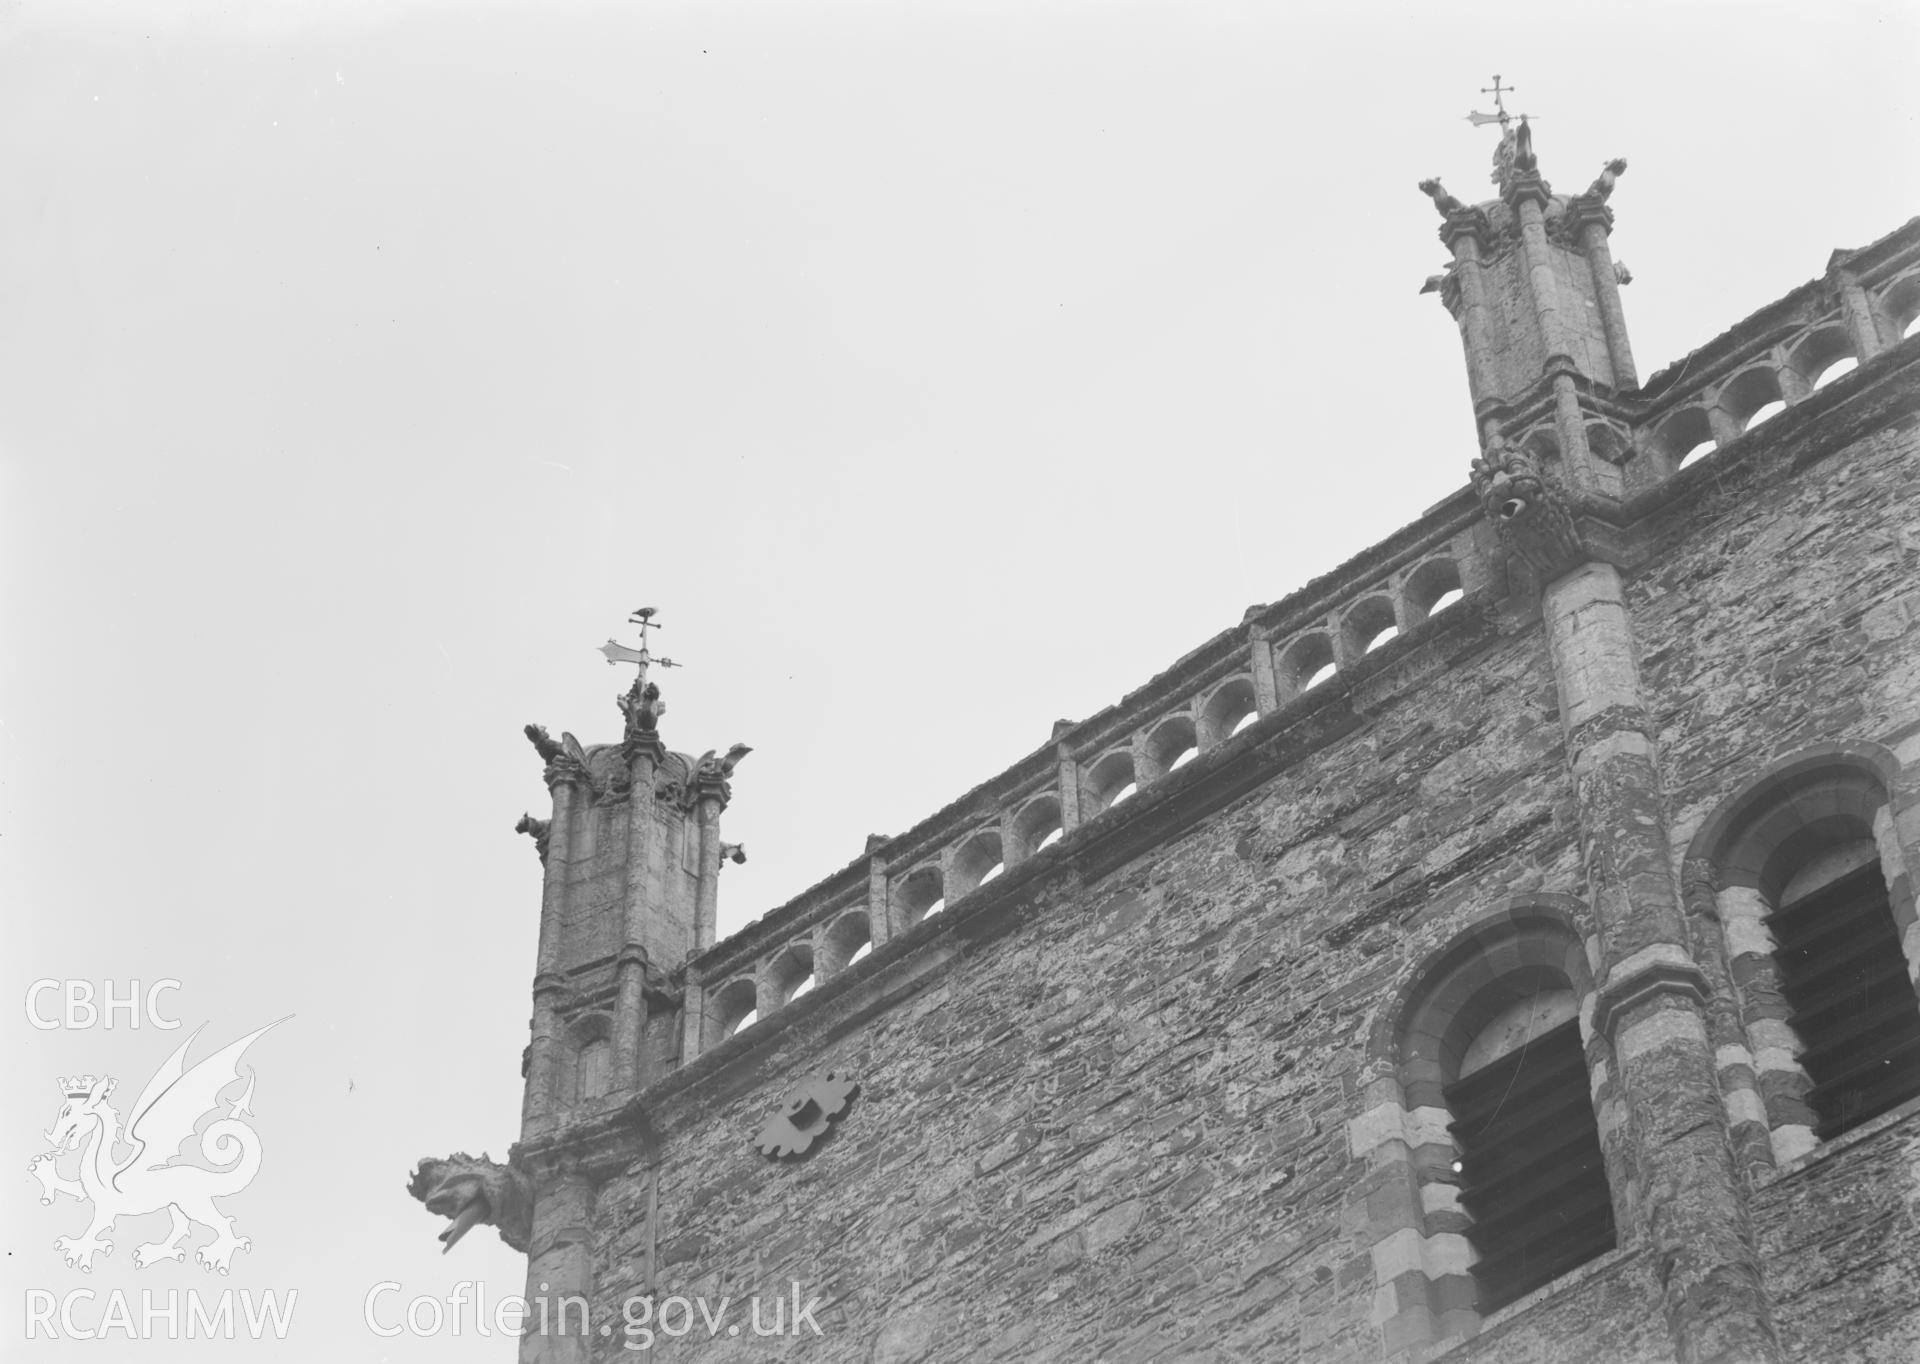 Digital copy of a black and white acetate negative showing exterior view of tower at St. David's Cathedral, taken by E.W. Lovegrove, July 1936.